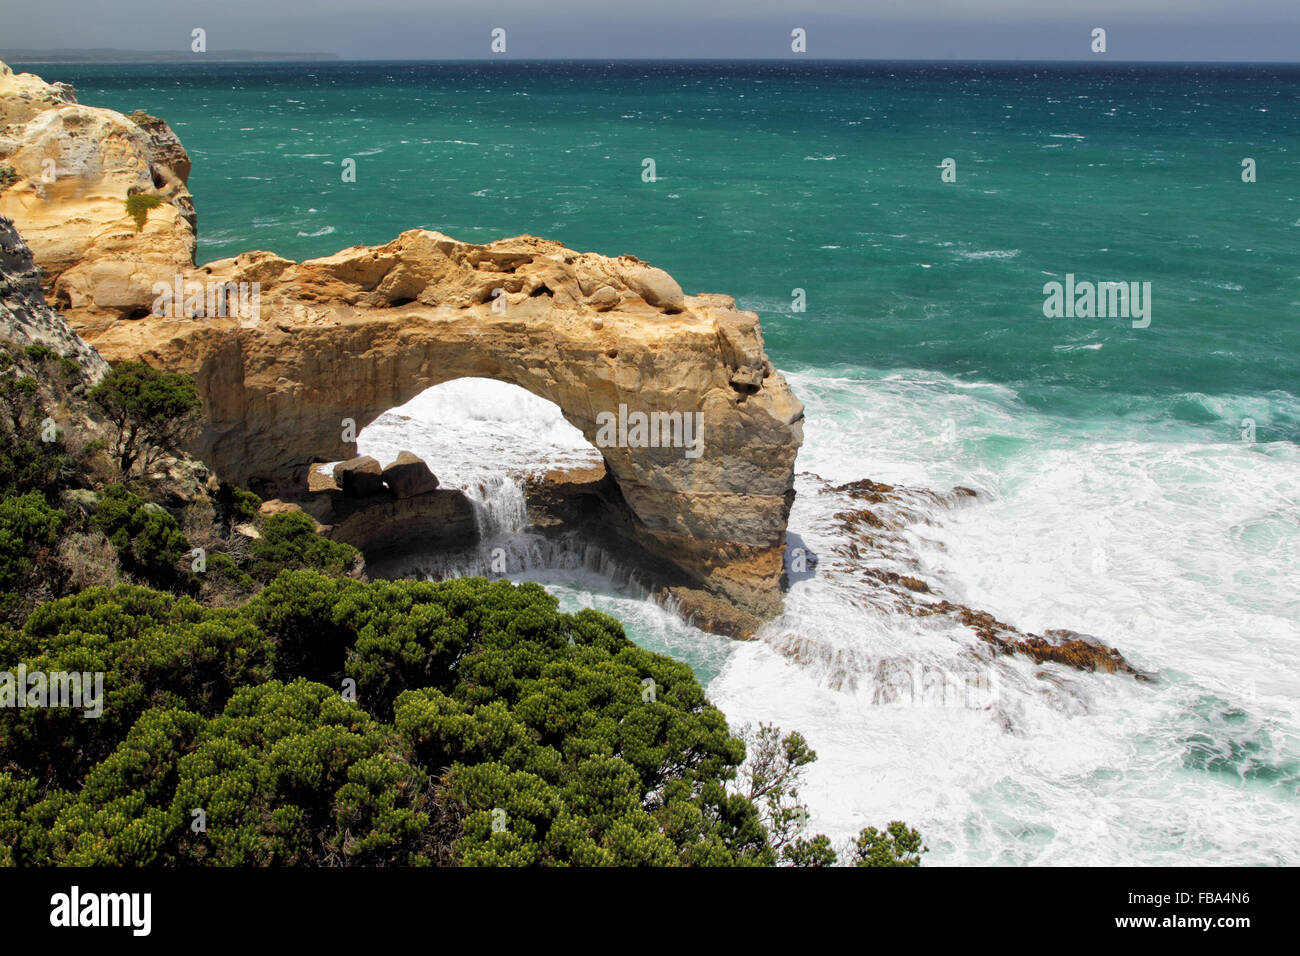 The Arch, a pierced rock in the Port Campbell National Park at the Great Ocean Road in Victoria, Australia. Stock Photo